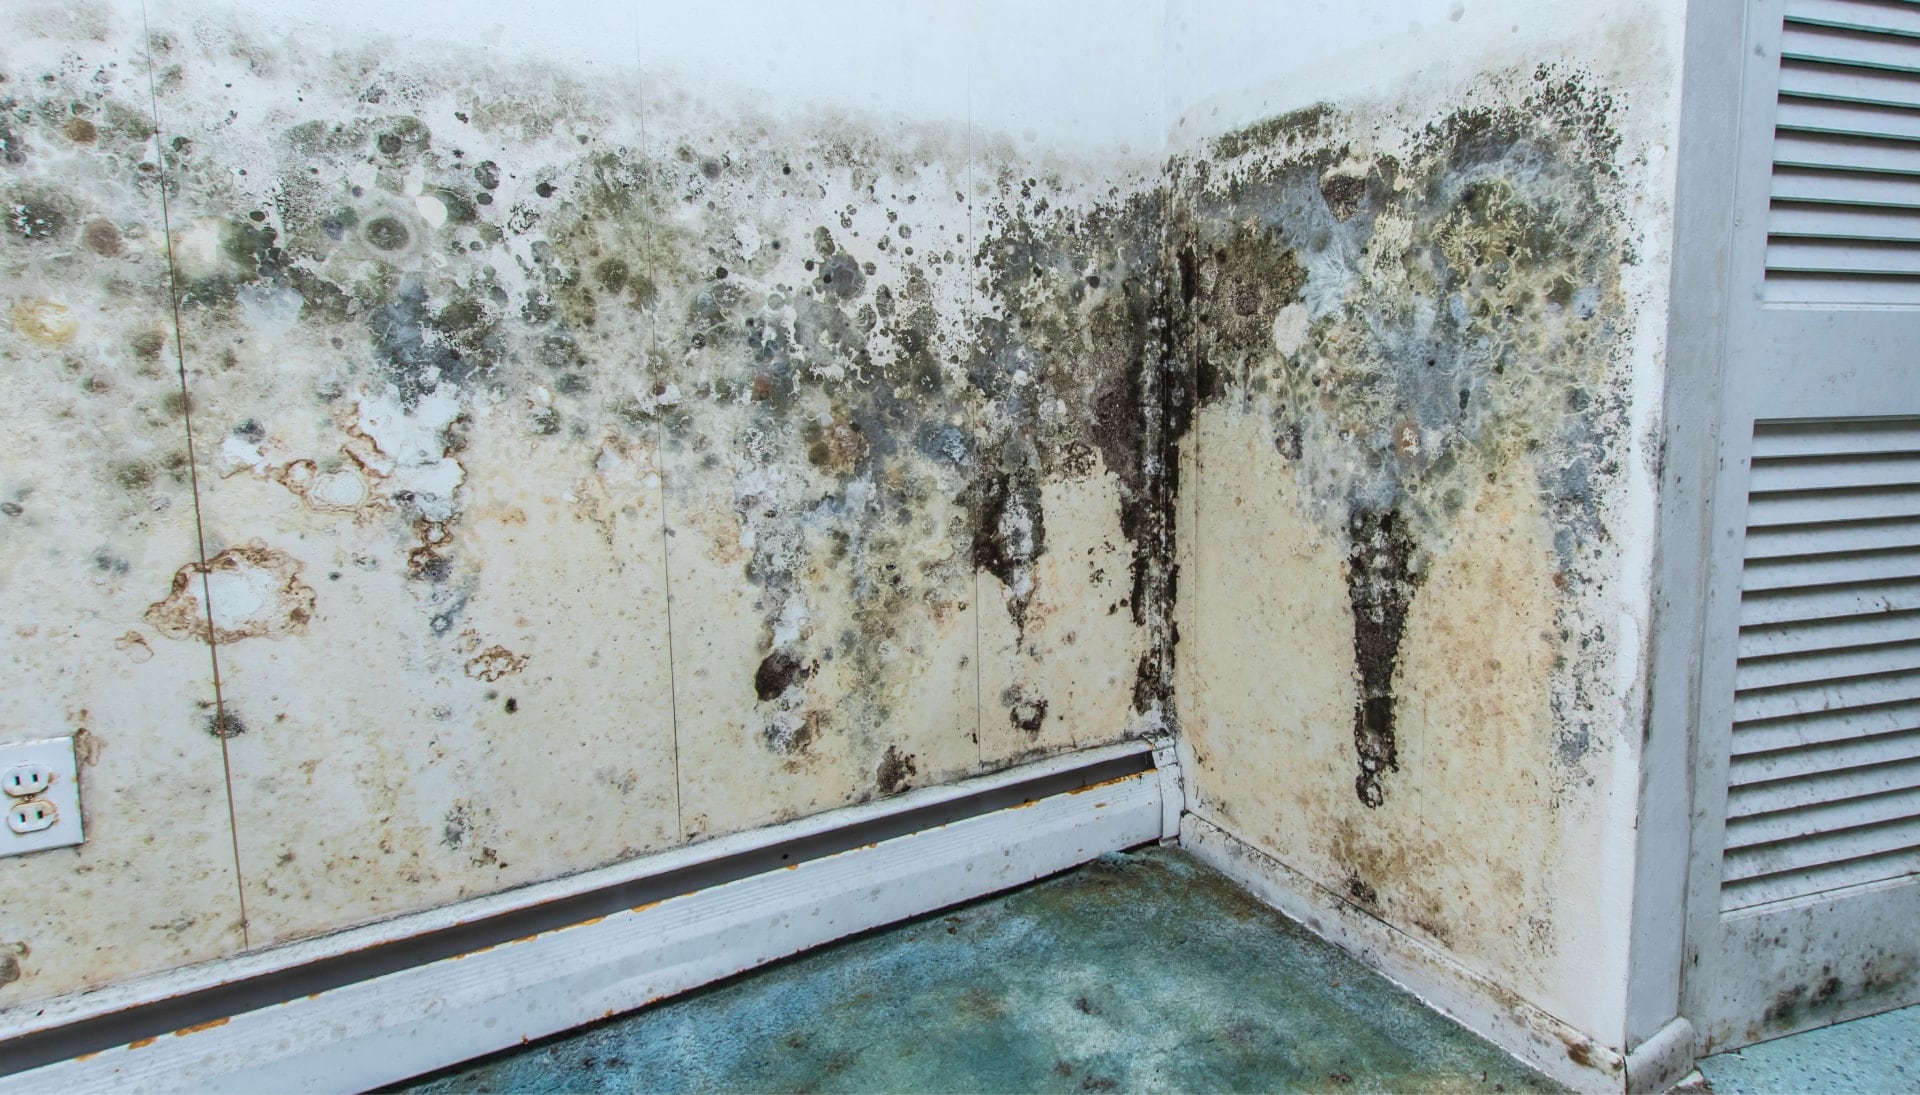 Professional mold removal, odor control, and water damage restoration service in Gulfport, Mississippi.